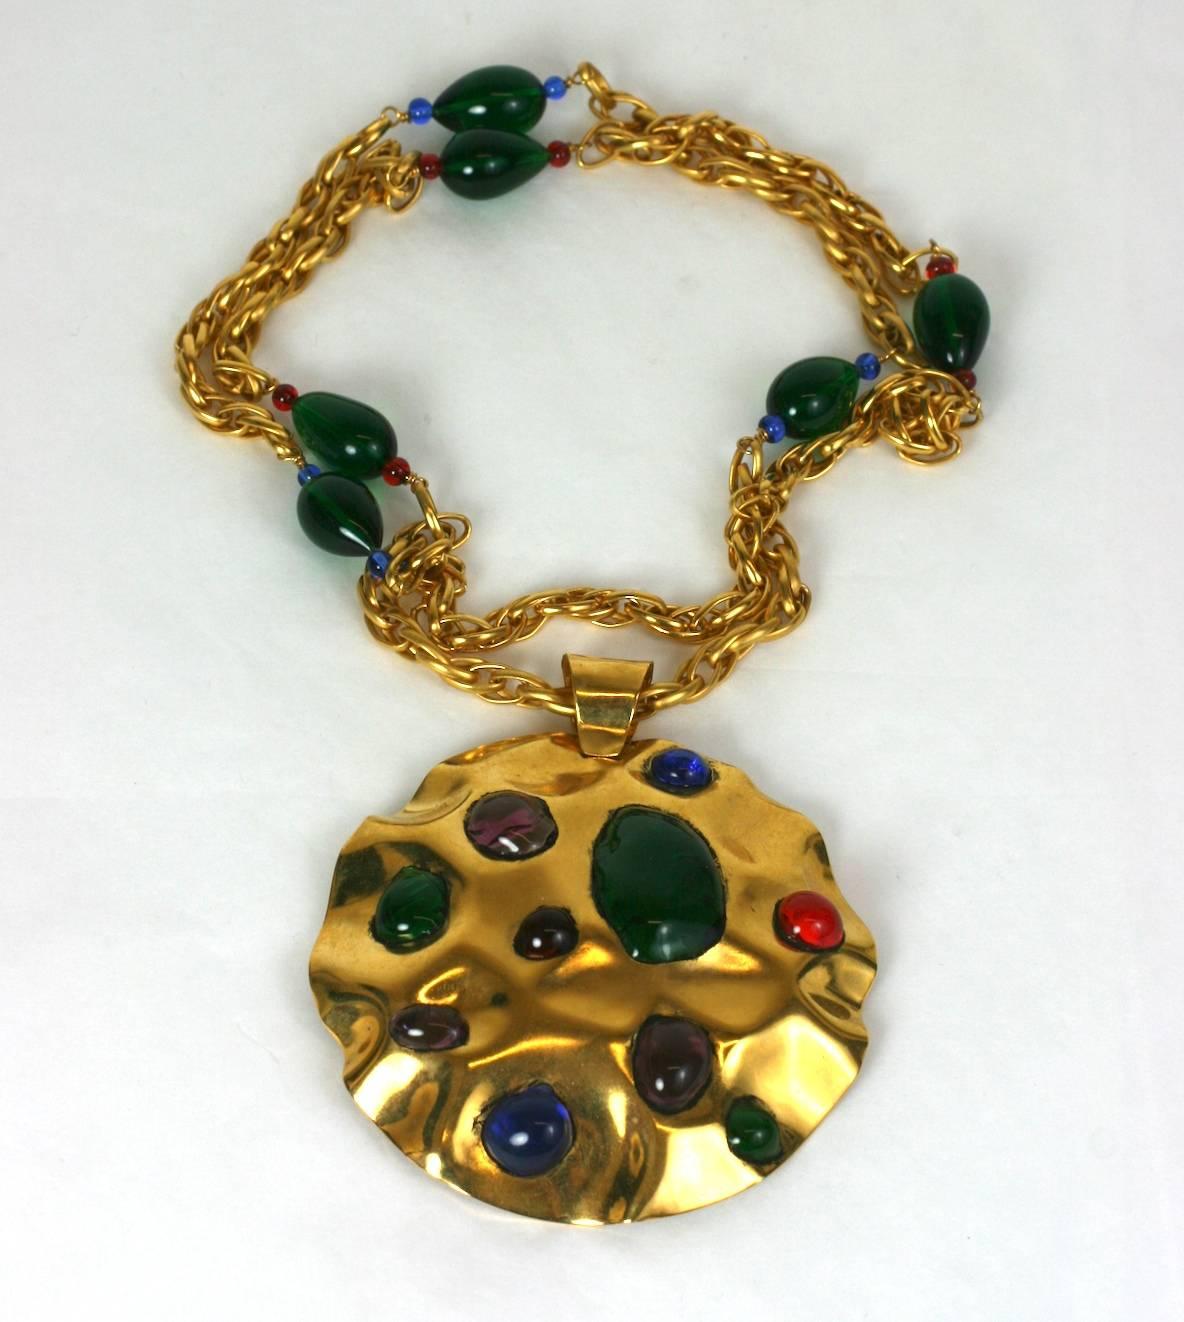 Yves Saint Laurent Haute Couture 1980s Berber inspired gilt, hammered pendant necklace.
Haute Couture Unsigned, Made by hand by Maison Goossens with poured glass multi colored cabochons. Wonderful large scale. Poured glass beads in coordinating